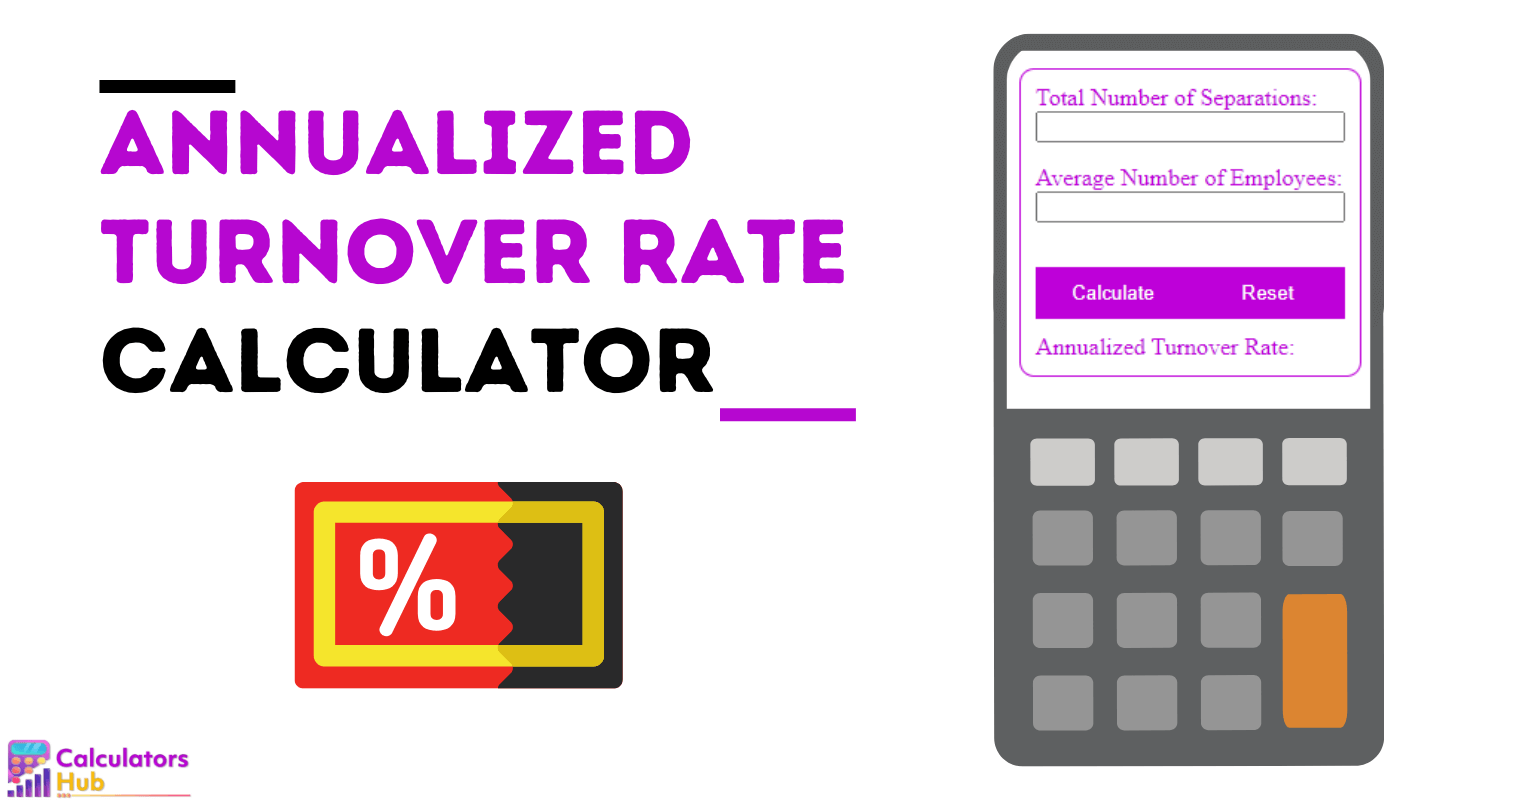 Annualized Turnover Rate Calculator